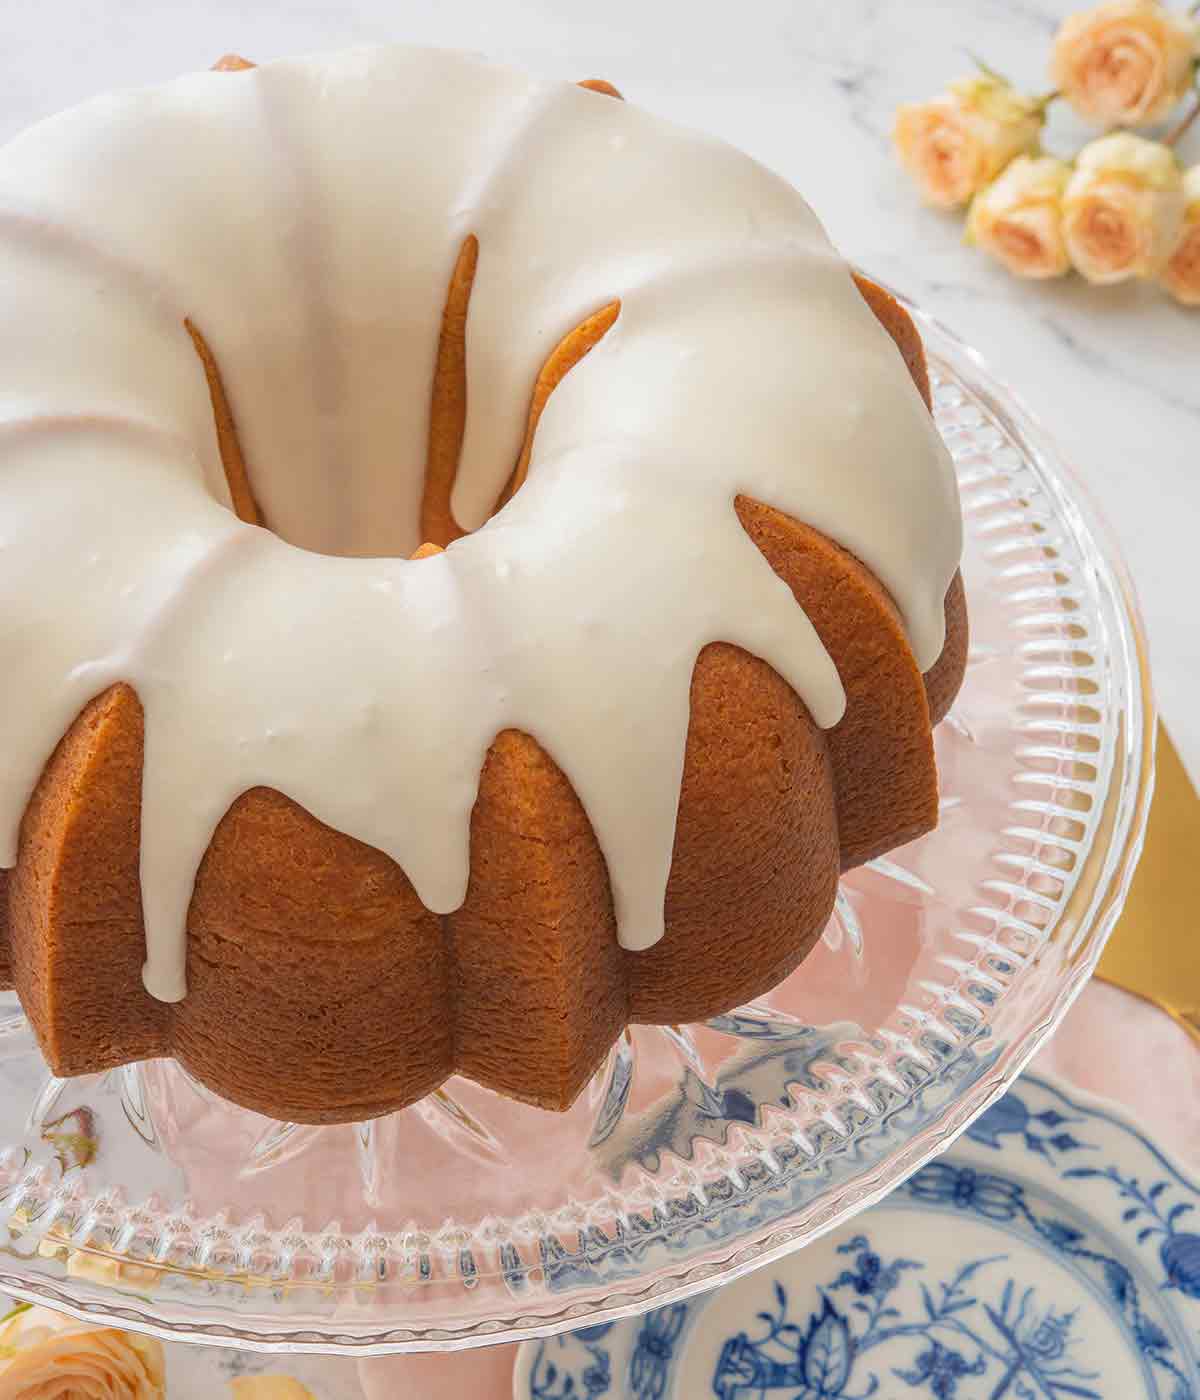 Close up of a glazed vanilla Bundt cake on a clear cake stand with roses in the background.